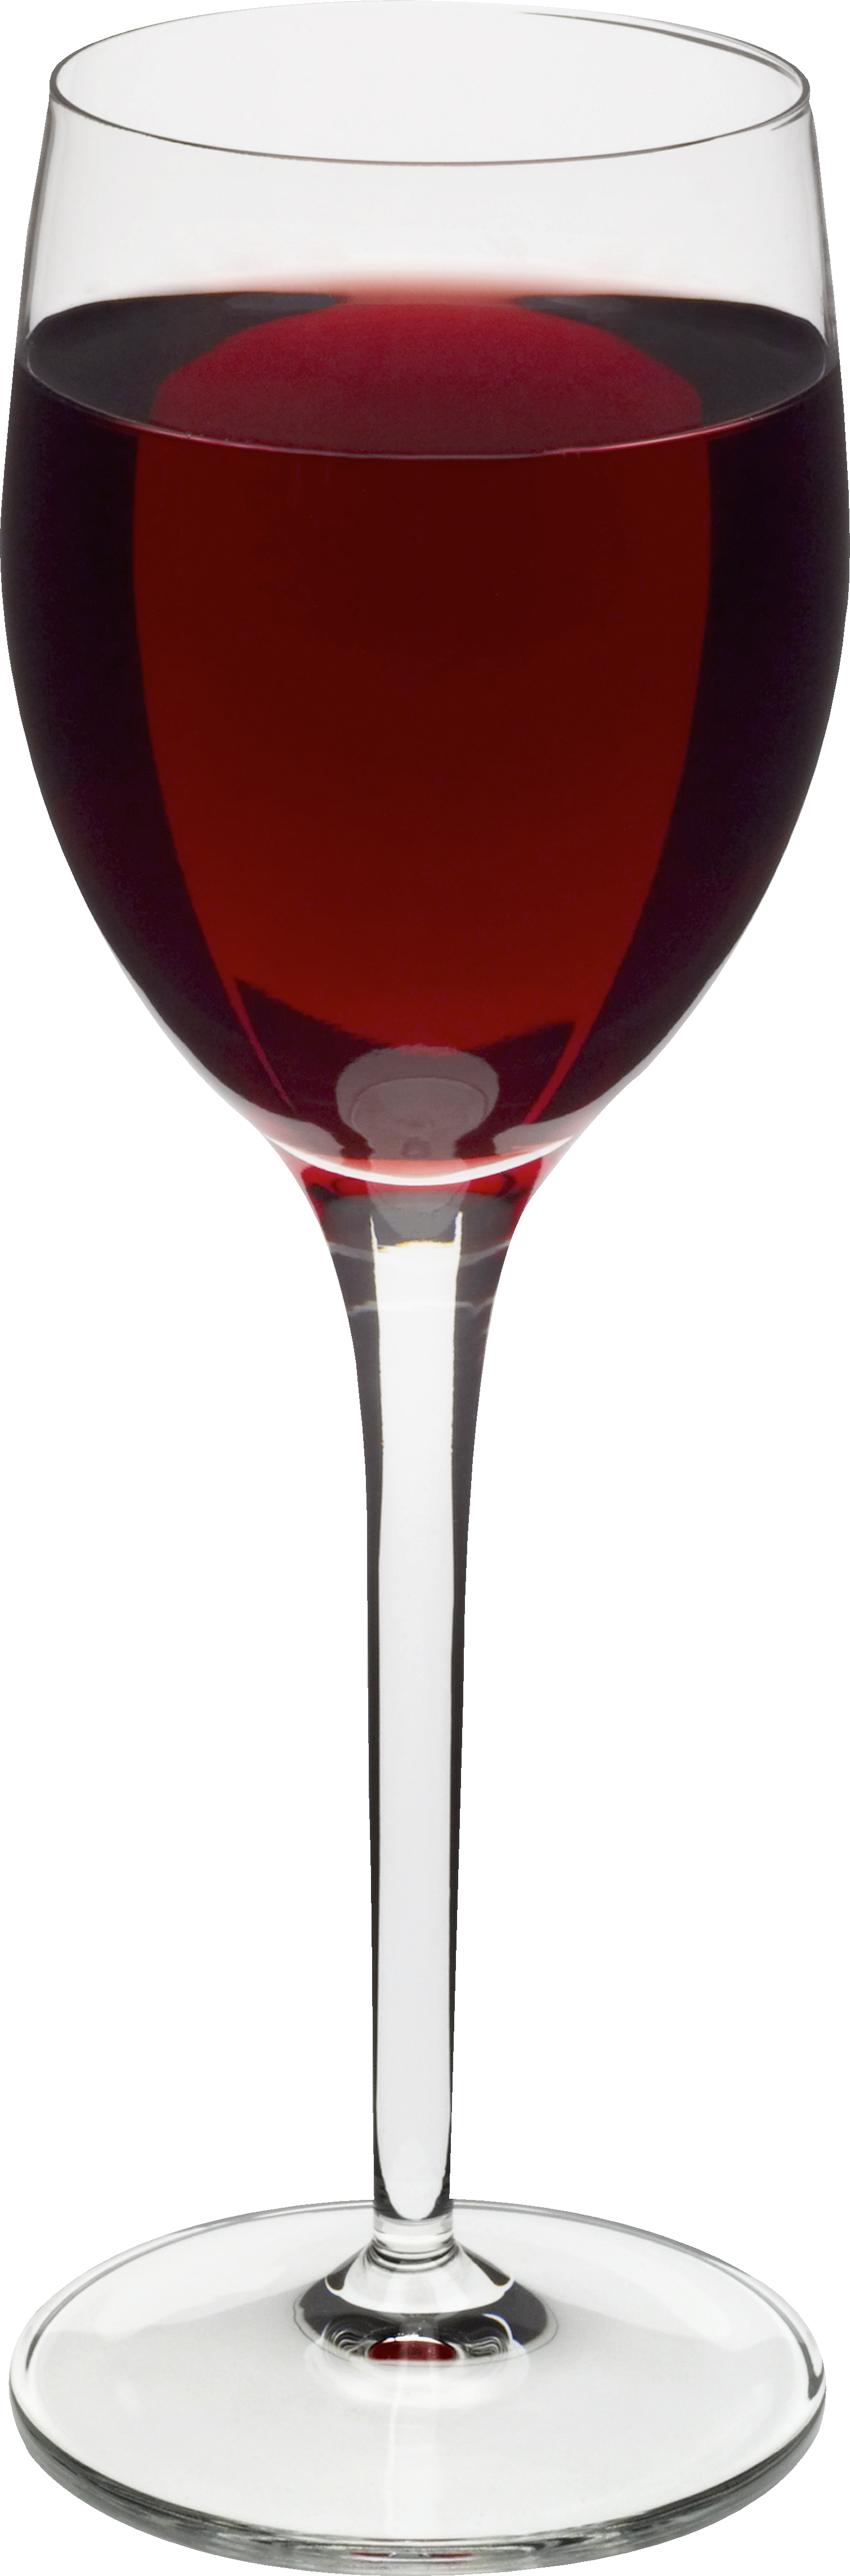 wine-glass-png-hd-images-find-over-100-of-the-best-free-wine-glass